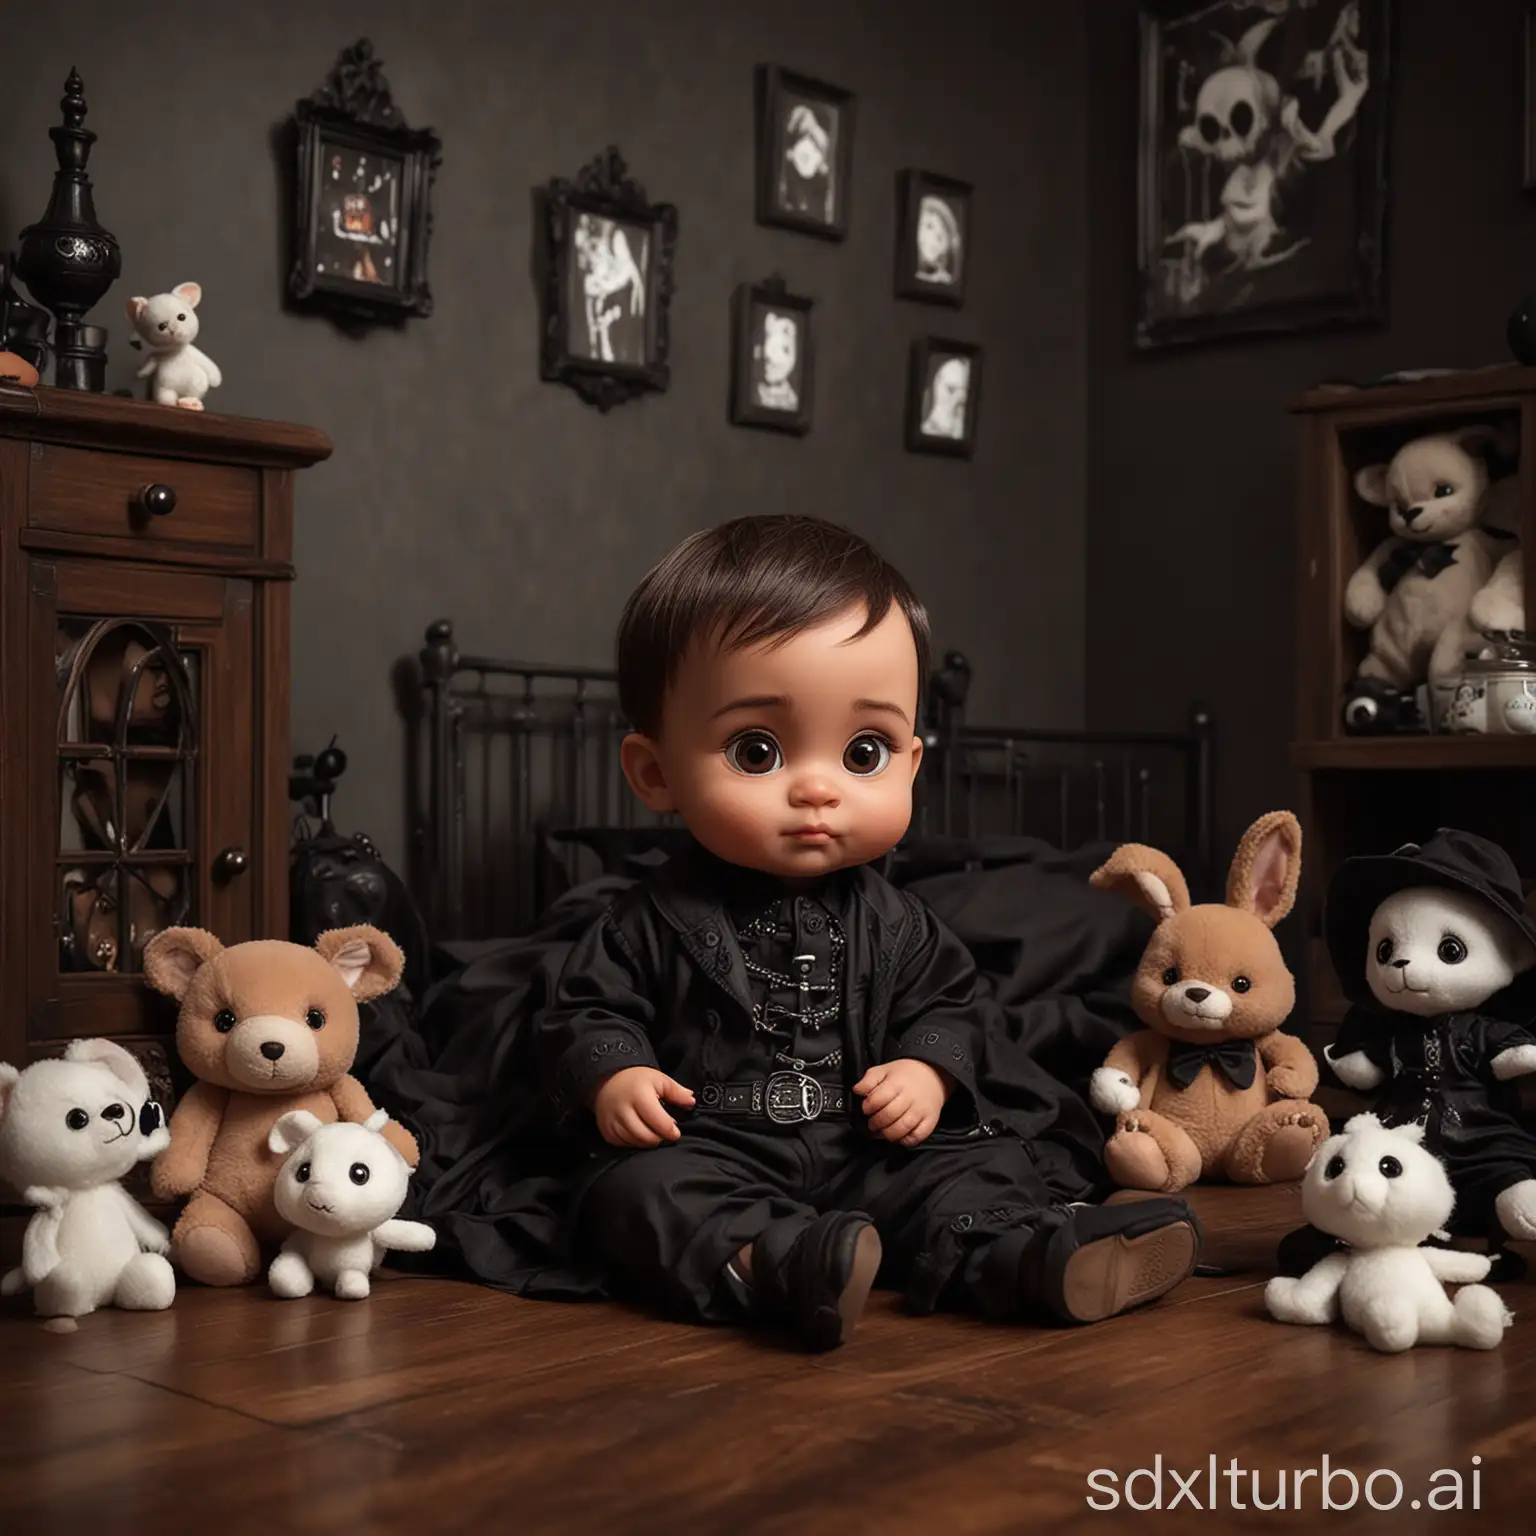 Super Cute, adorable, lighter skinned black, brown, little baby boy, toddler, big brown eyes, gothic clothes, playing, siting on the floor in gothic baby room, dark decor, spooky, Pixar, The Addams Family, Halloween, chibi, ultra realistic, shoes on feet, one small stuffed bunny in one hand